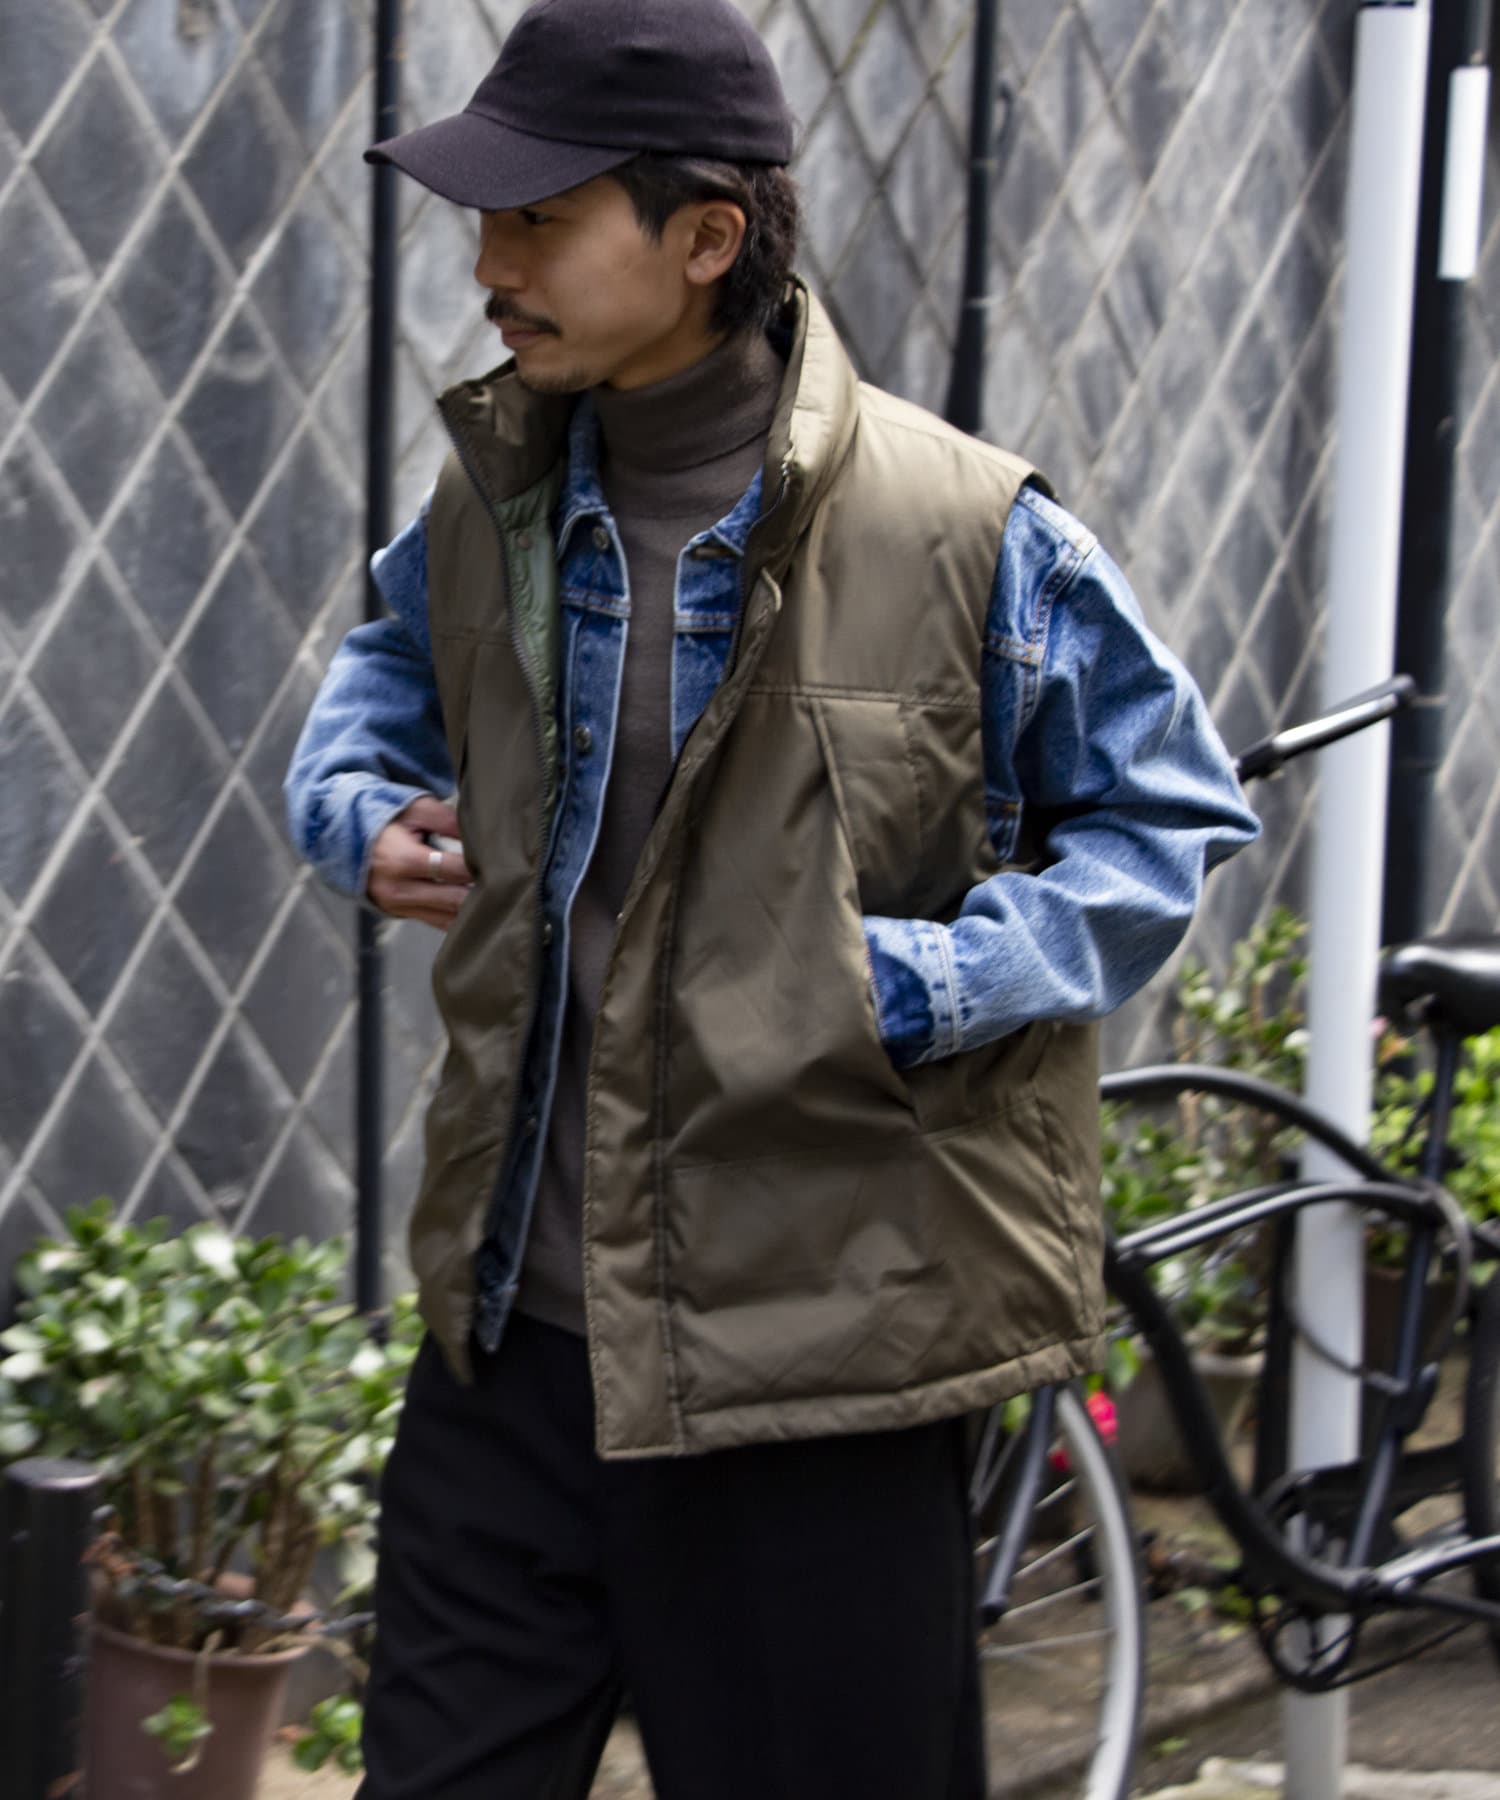 TAION】GLOSTER別注 モンスターベスト MILITALY vest | FREDY ...